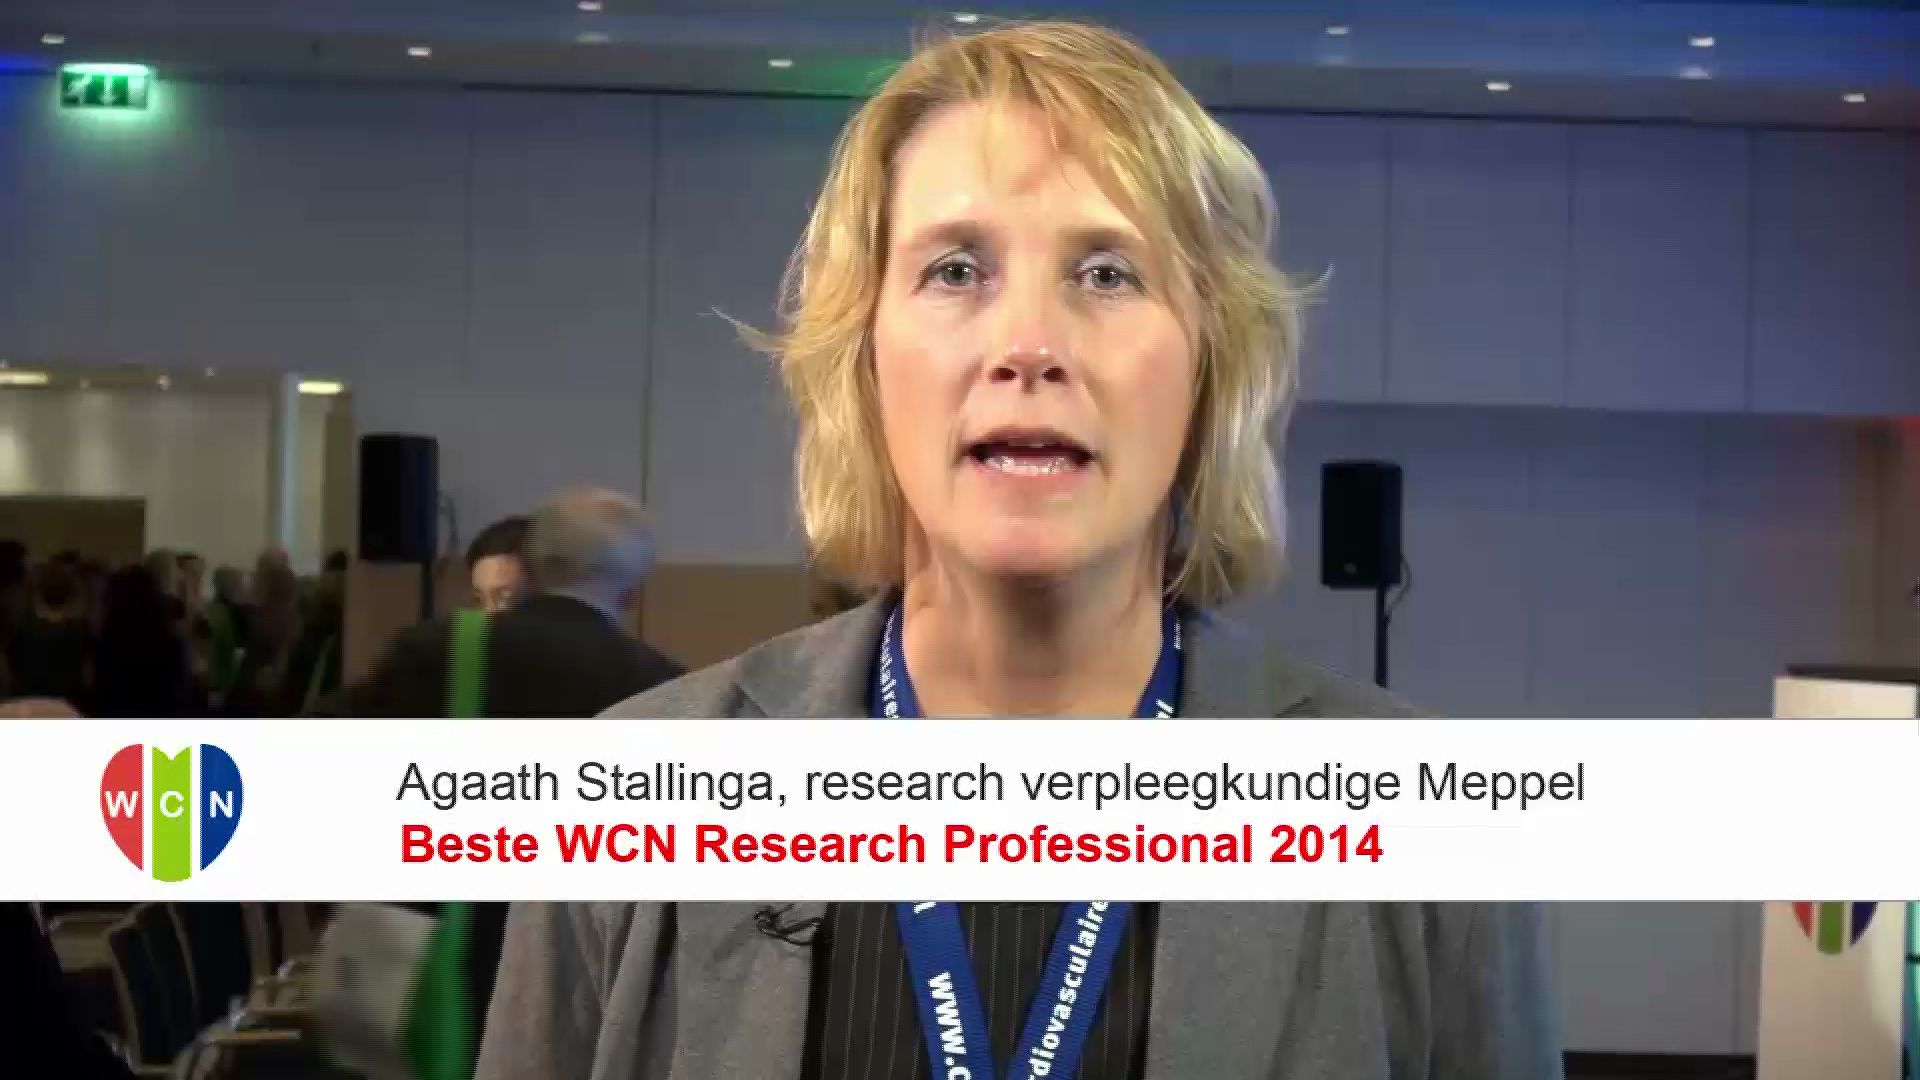 Beste Research professional in 2014: Agaath Stallinga